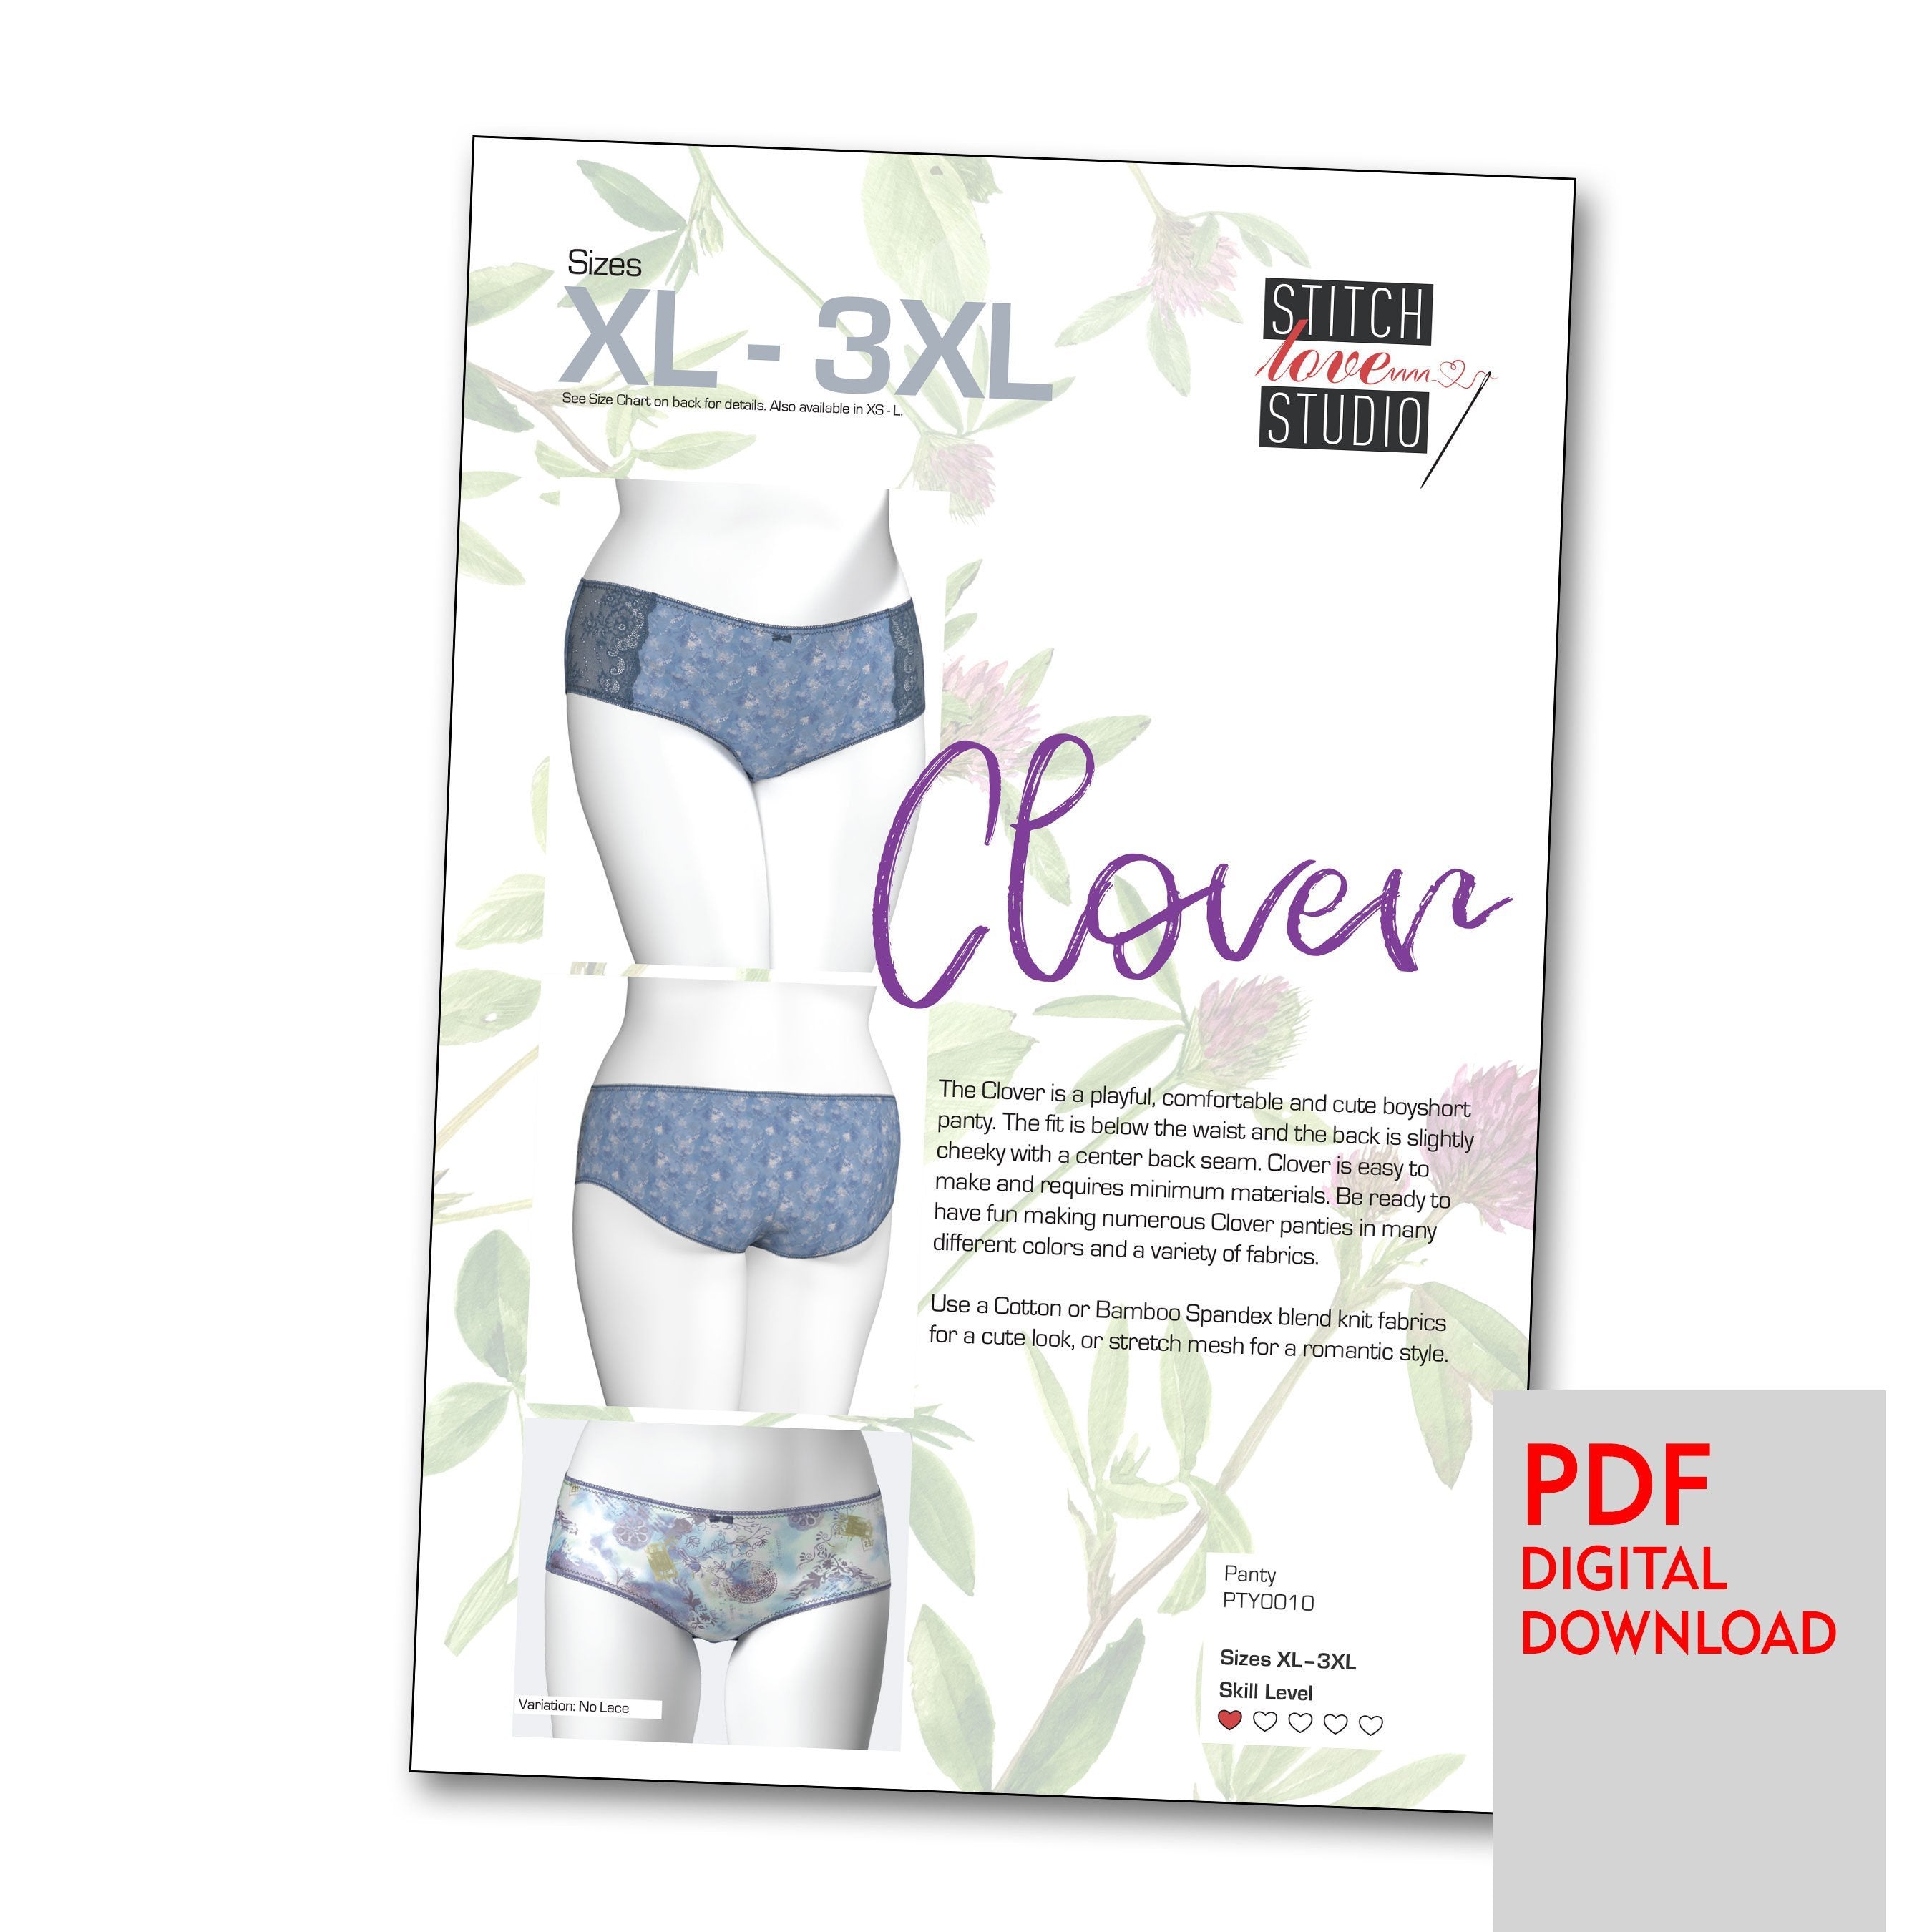 The latest collection of underwear & panties size XXL